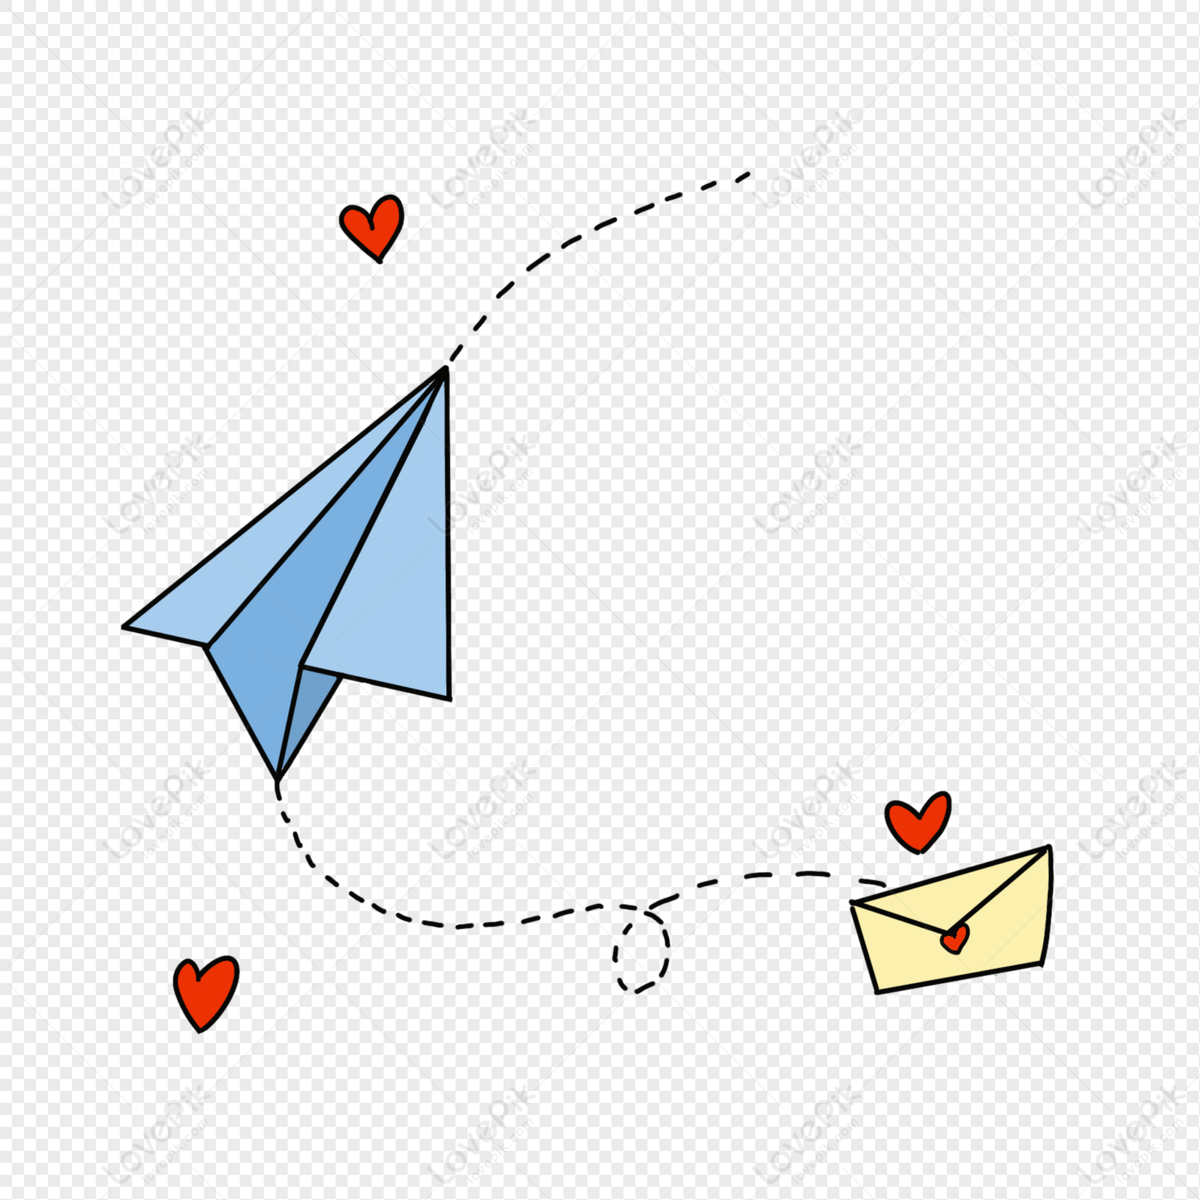 Cartoon Paper Airplane Envelope PNG Picture And Clipart Image For Free  Download - Lovepik | 401300855